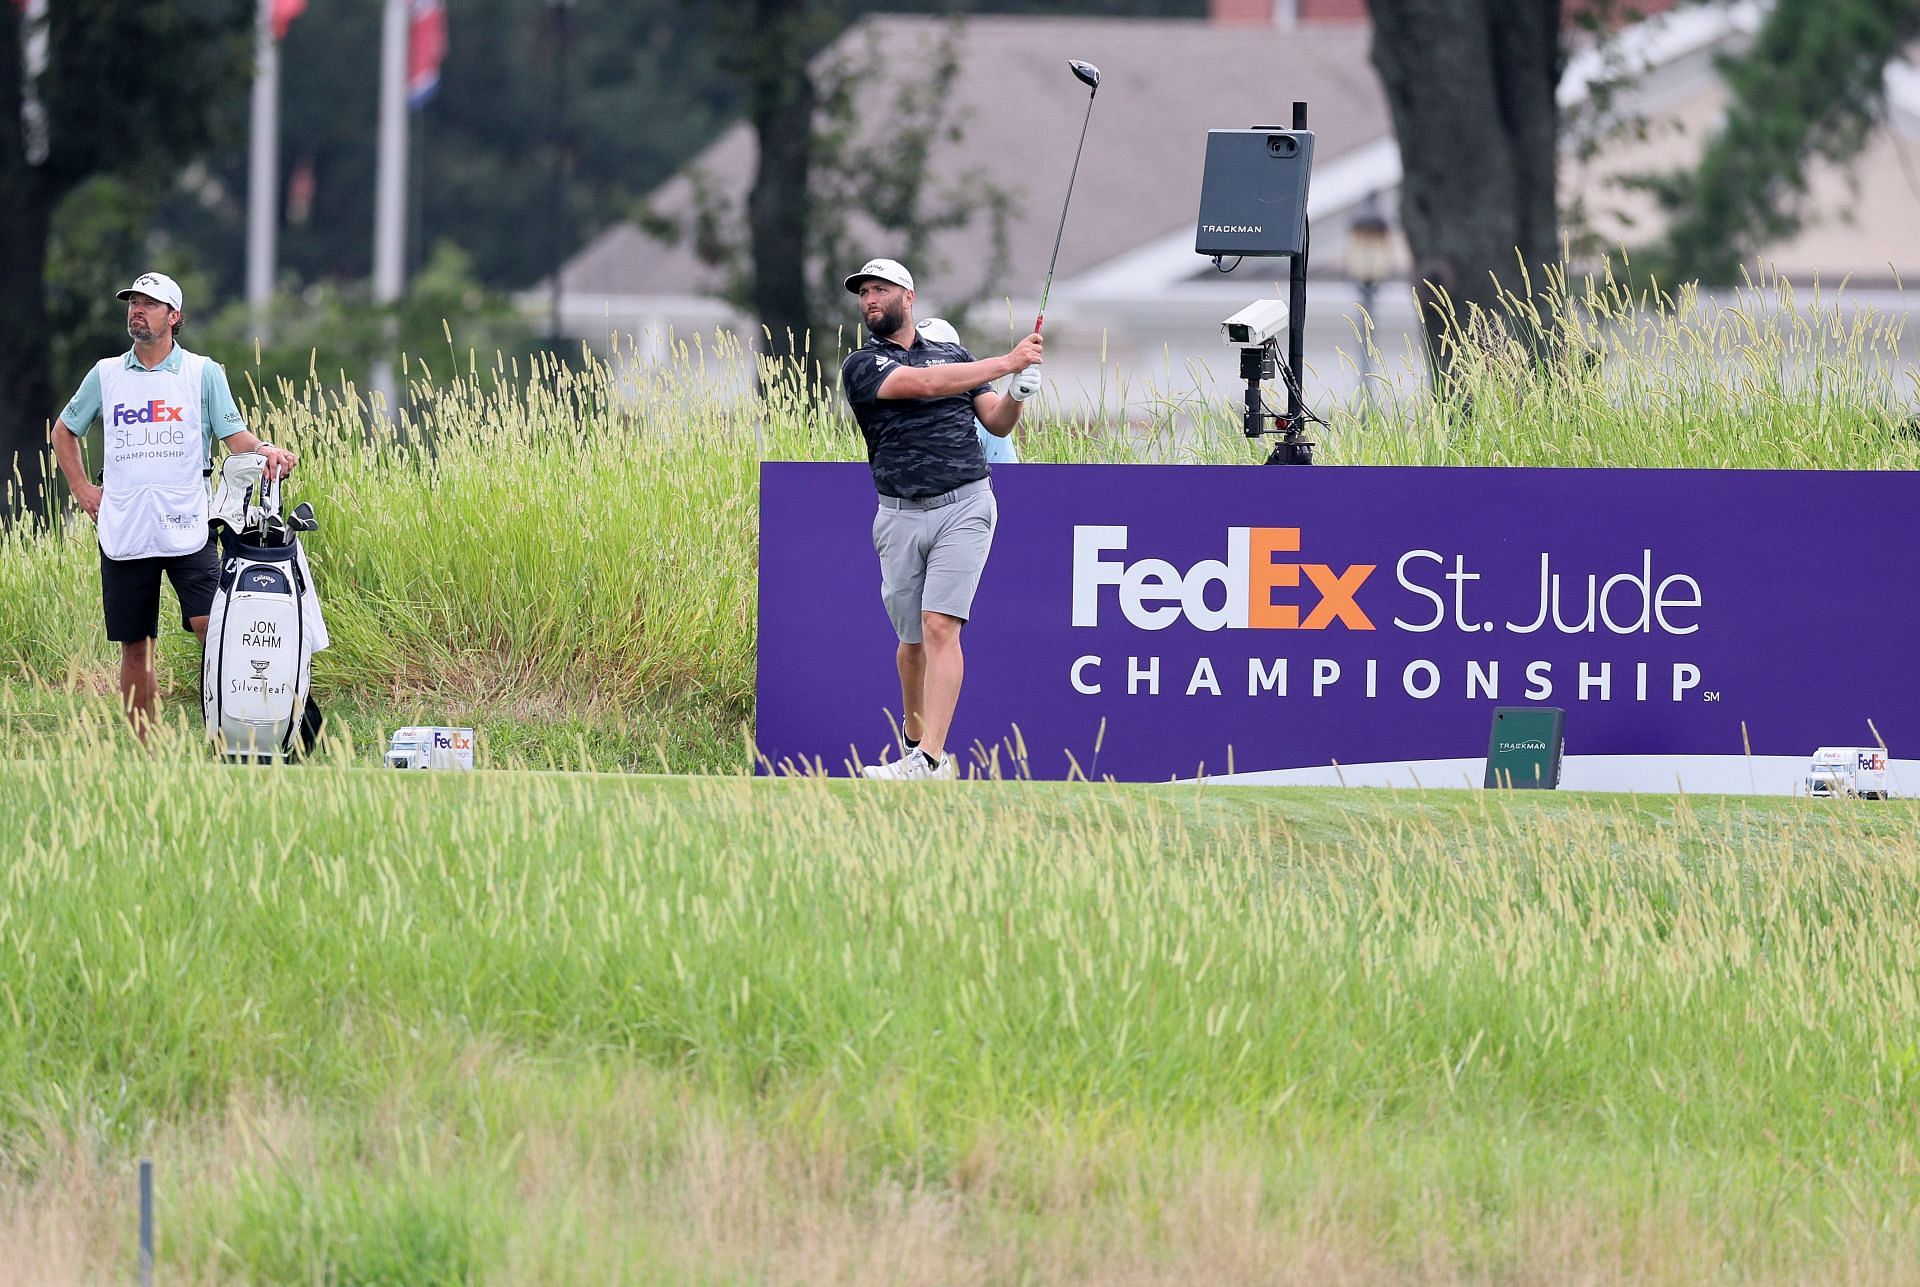 FedEx St. Jude Championship - Preview Day Three